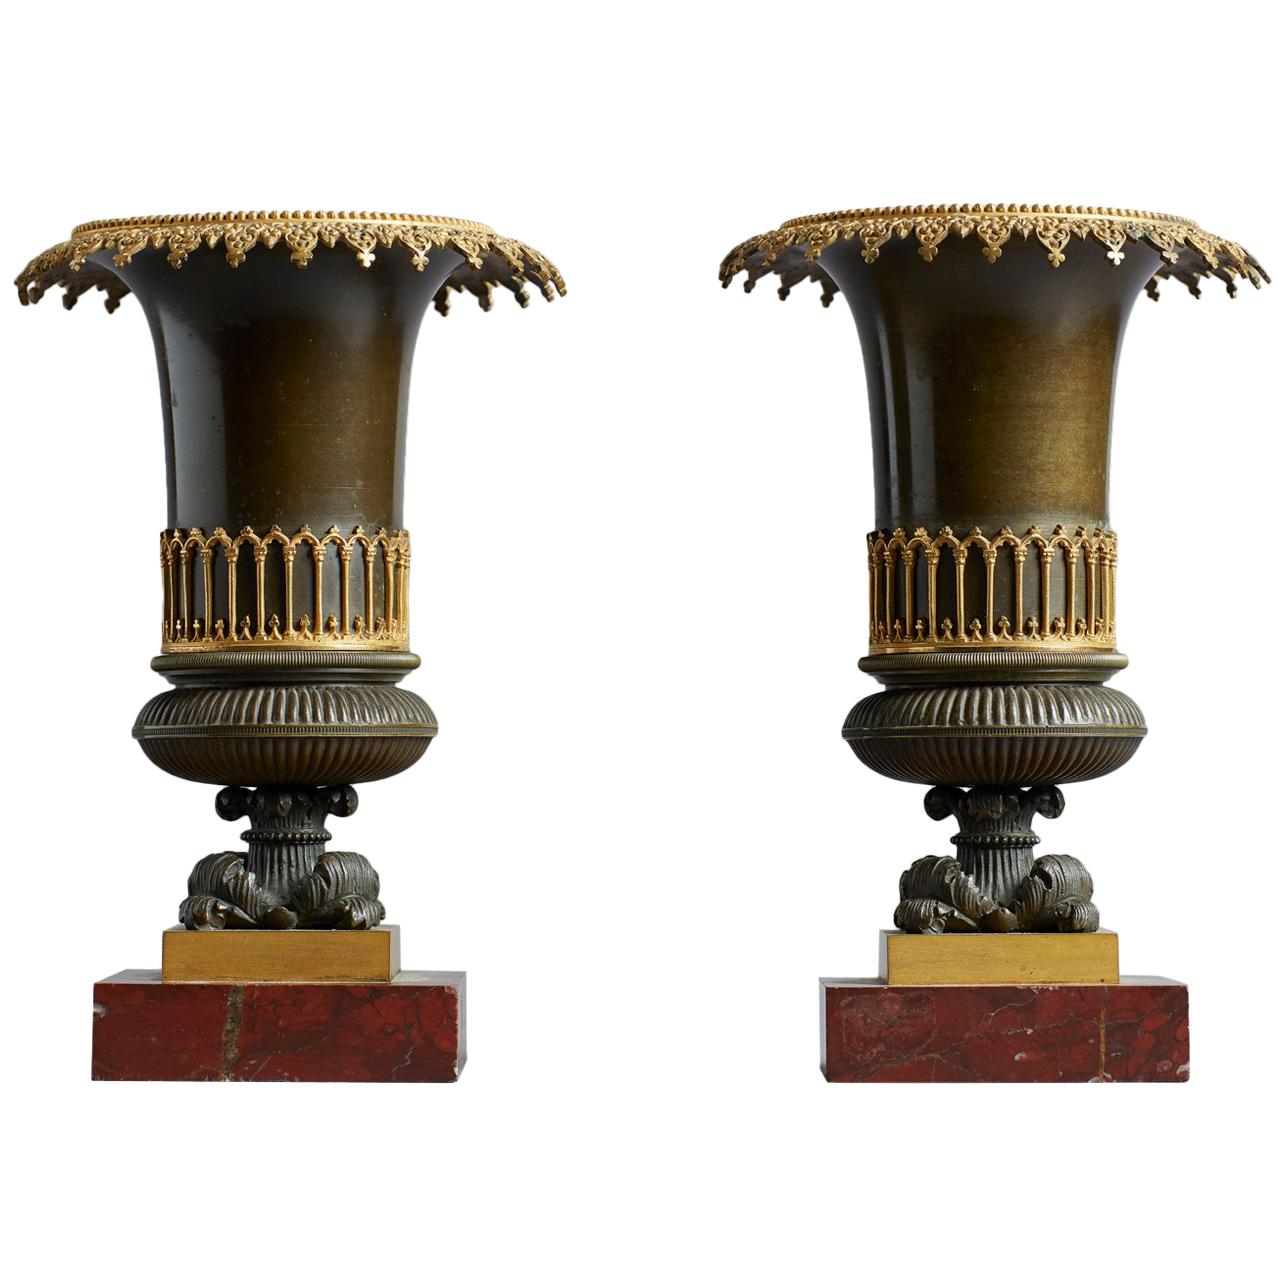 Pair of French Early 19th Century Restauration Gothic Revival Bronze Urns Vases